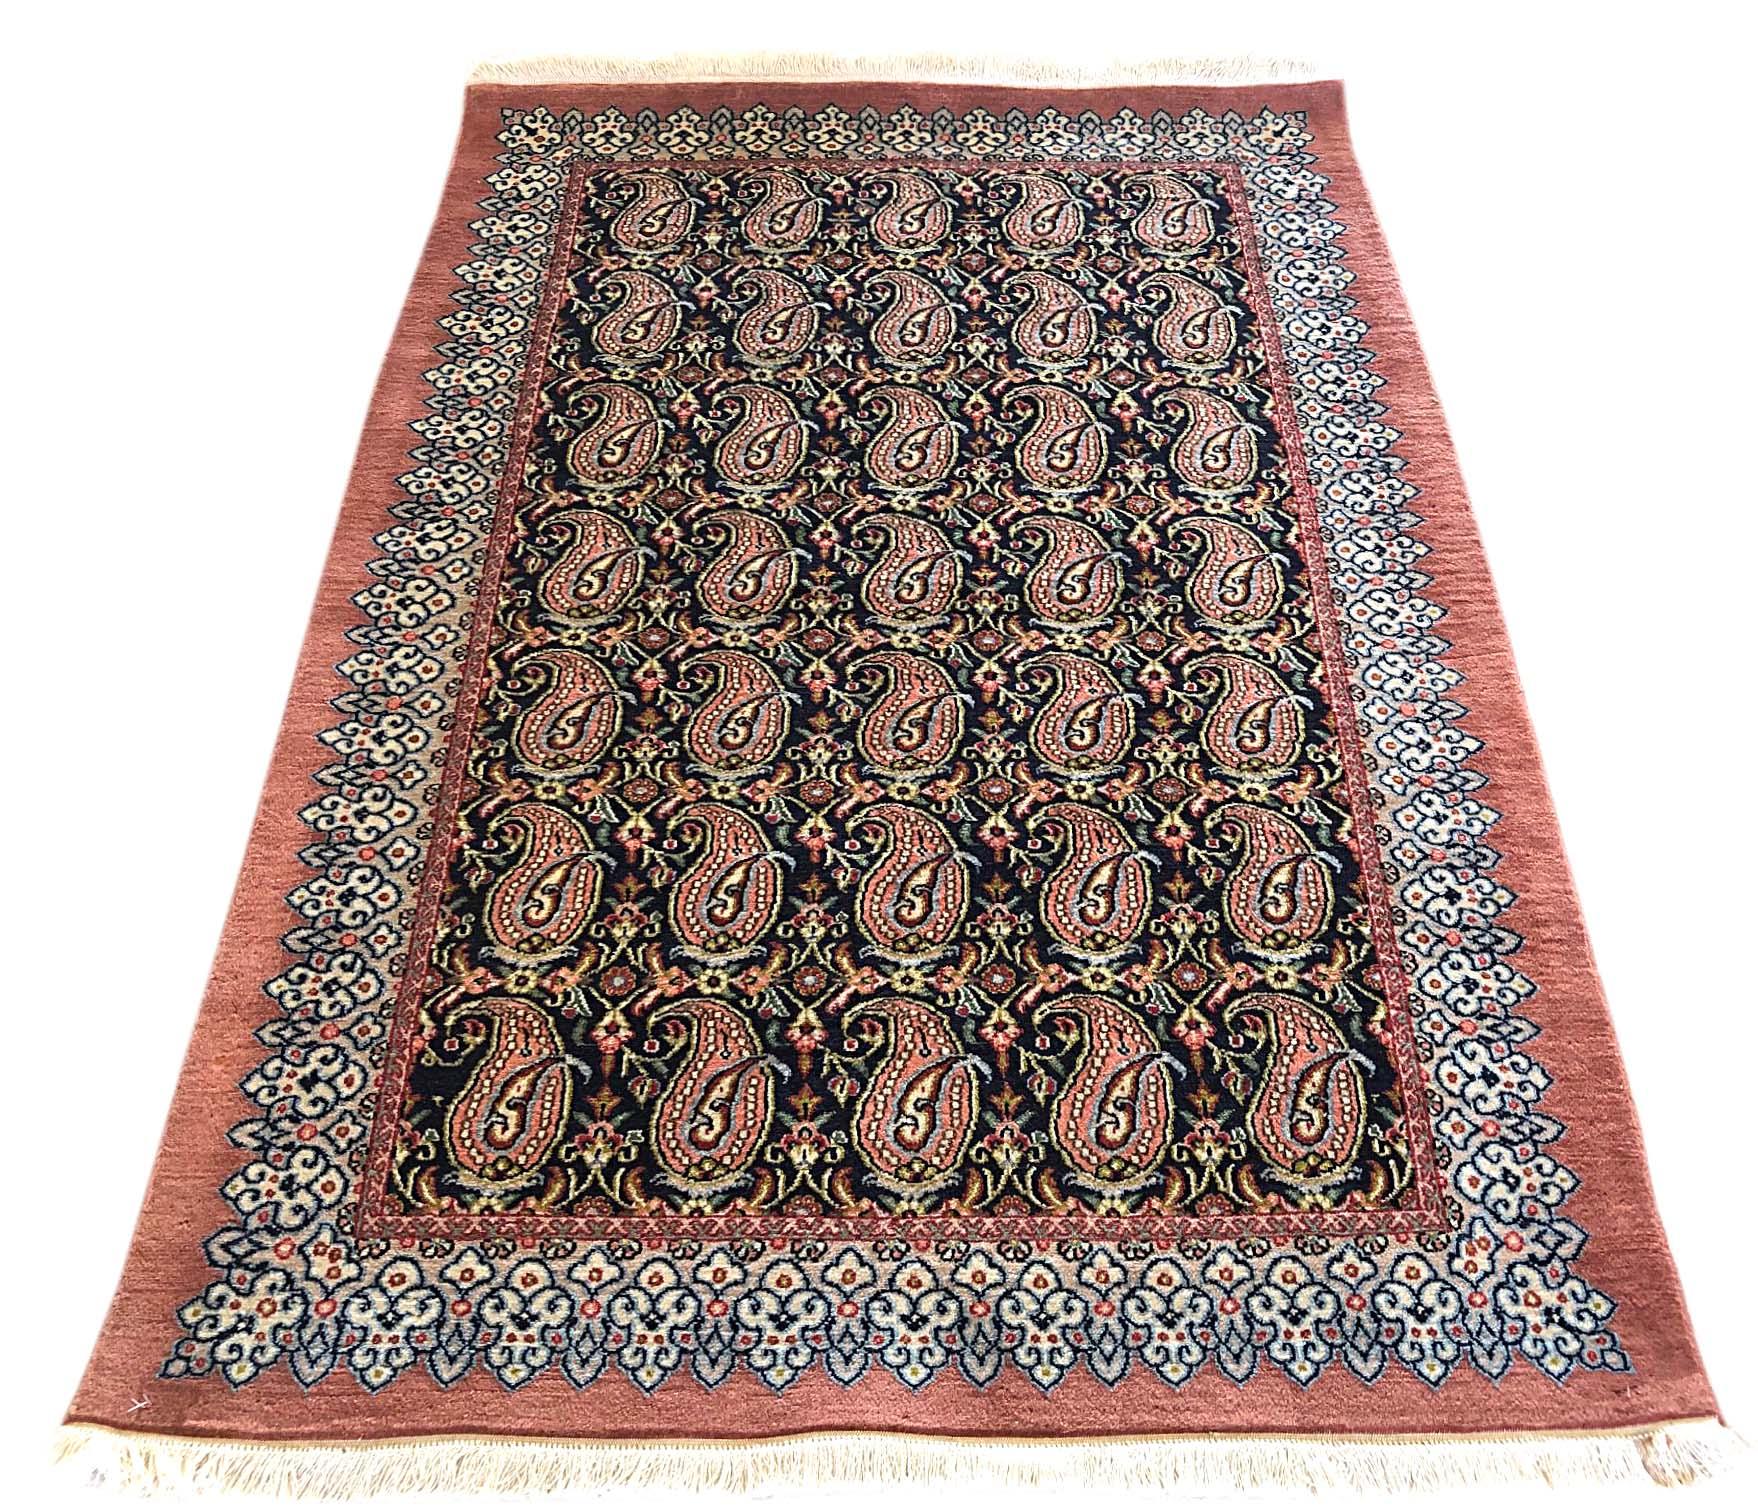 This authentic Persian Qum rug has wool pile and cotton foundation, this beautiful Persian Qum has paisley design with floral pattern. Qum rugs are well known for their high quality and unique design. The base is dark blue and border color is